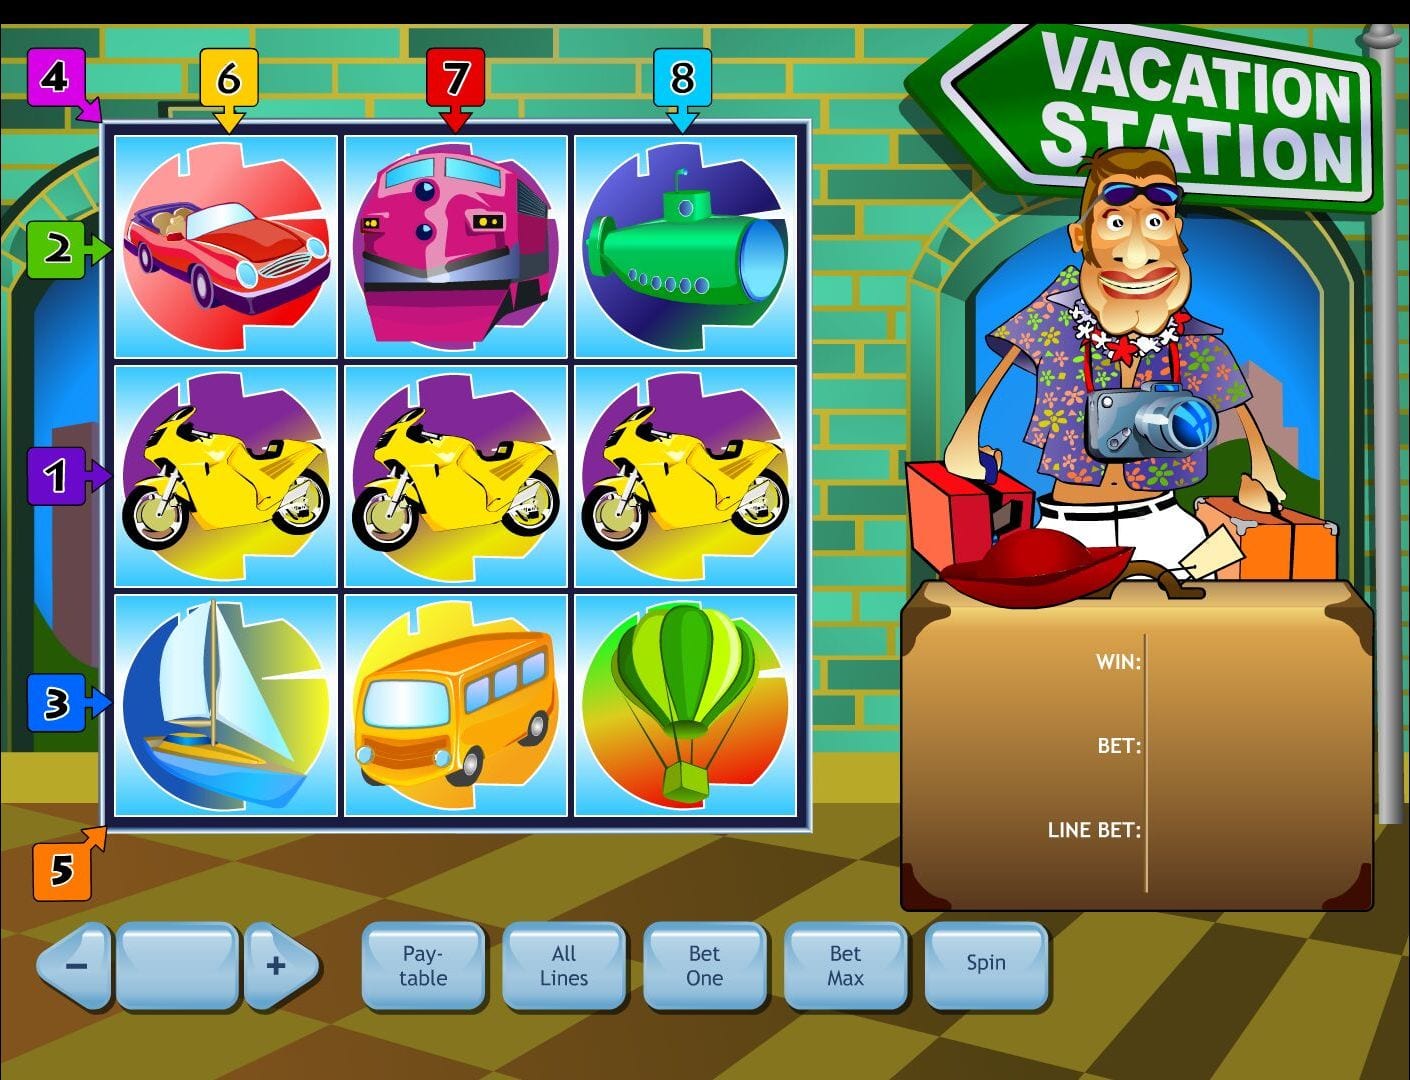 Vacation Station Free Online Slot